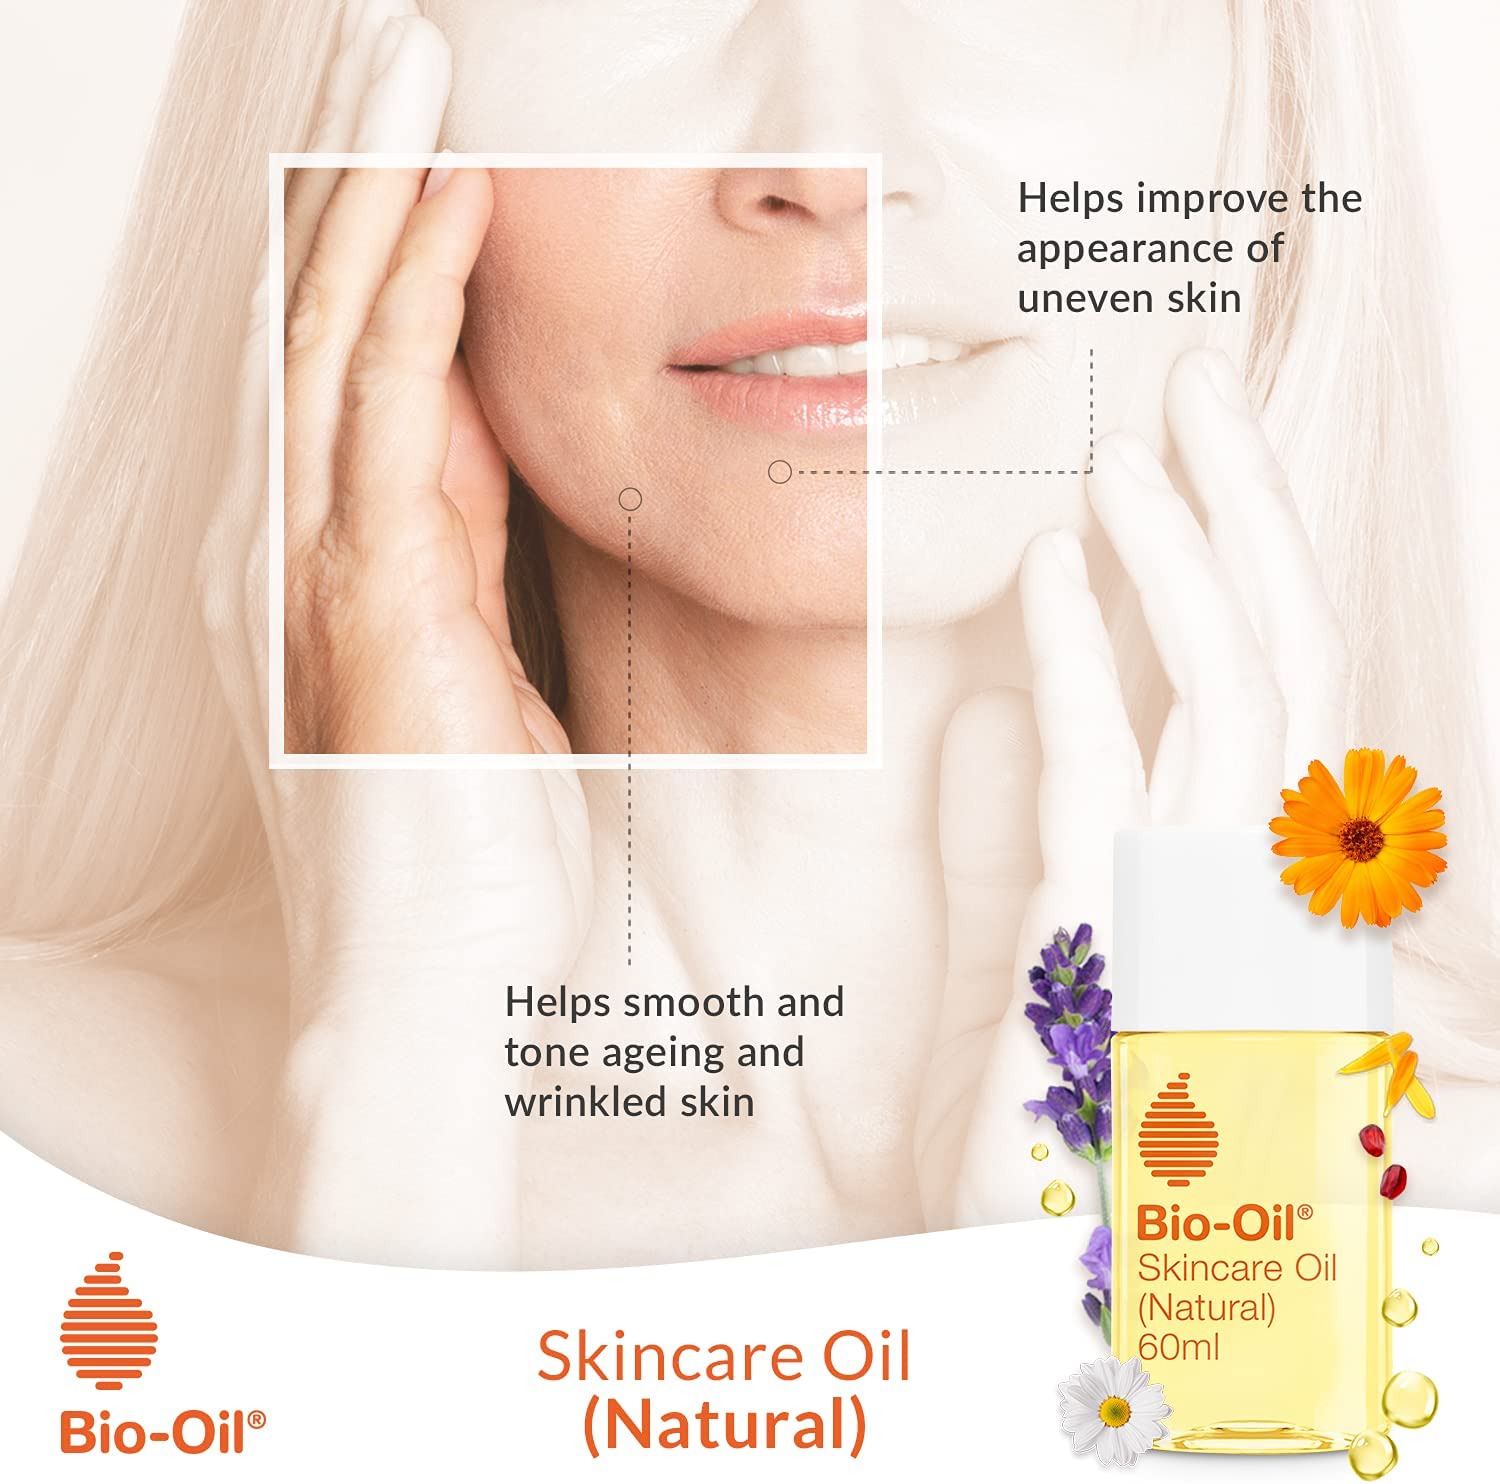 NEW Bio-Oil Natural Skincare Oil - 100% Natural Formulation - Improve the Appearance of Scars, Stretch Marks and Uneven